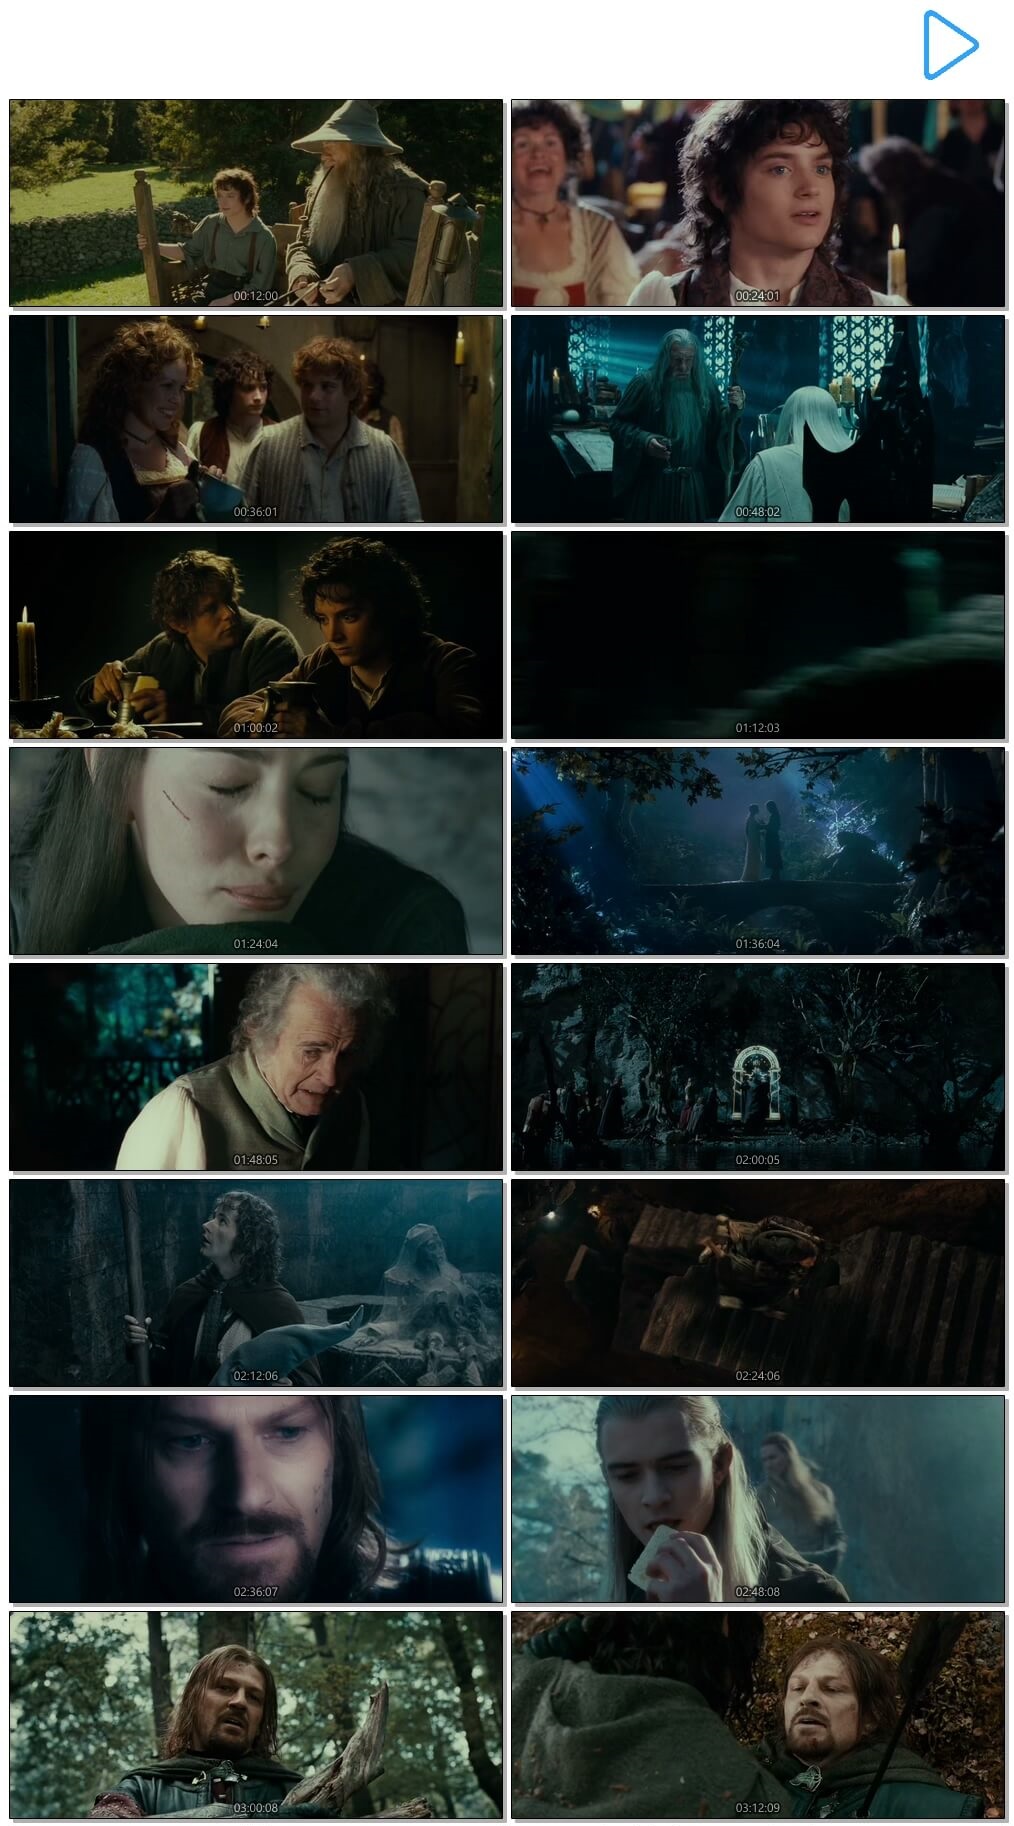 lord of rings 3 1080p full movie in hindi torrent download